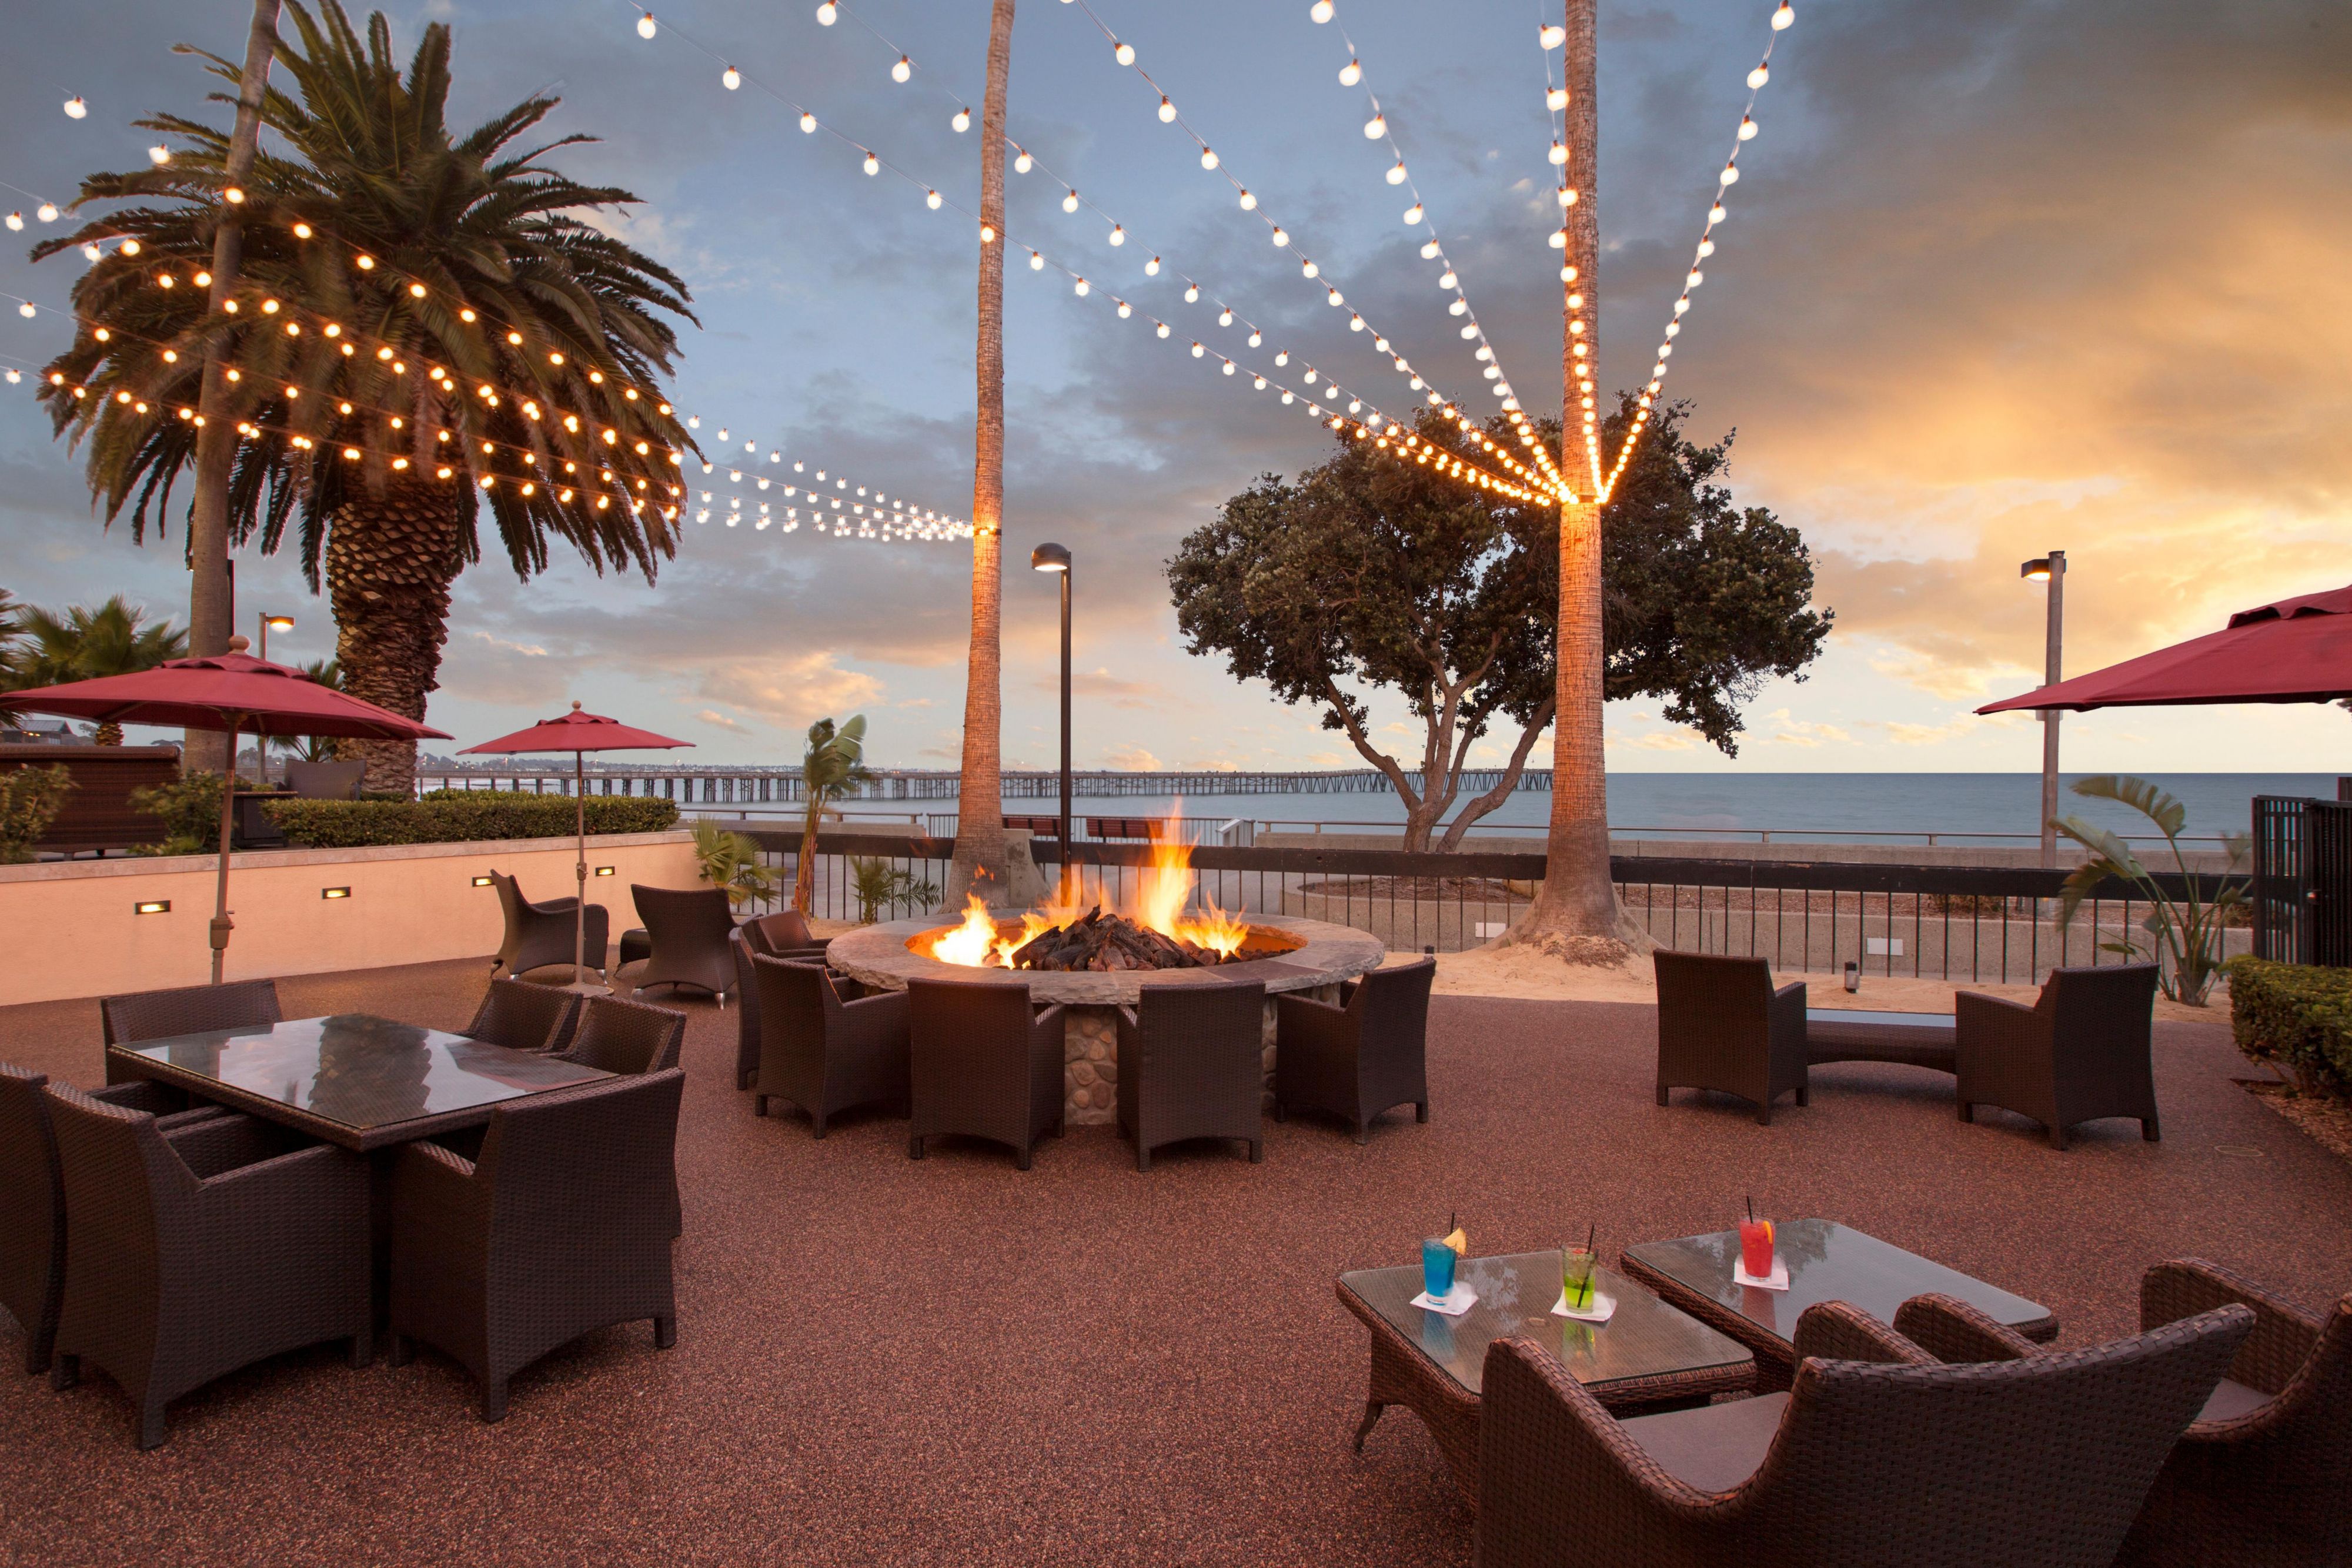 Sunsets from the Crowne Plaza Ventura Beach Hotel Fire Pit